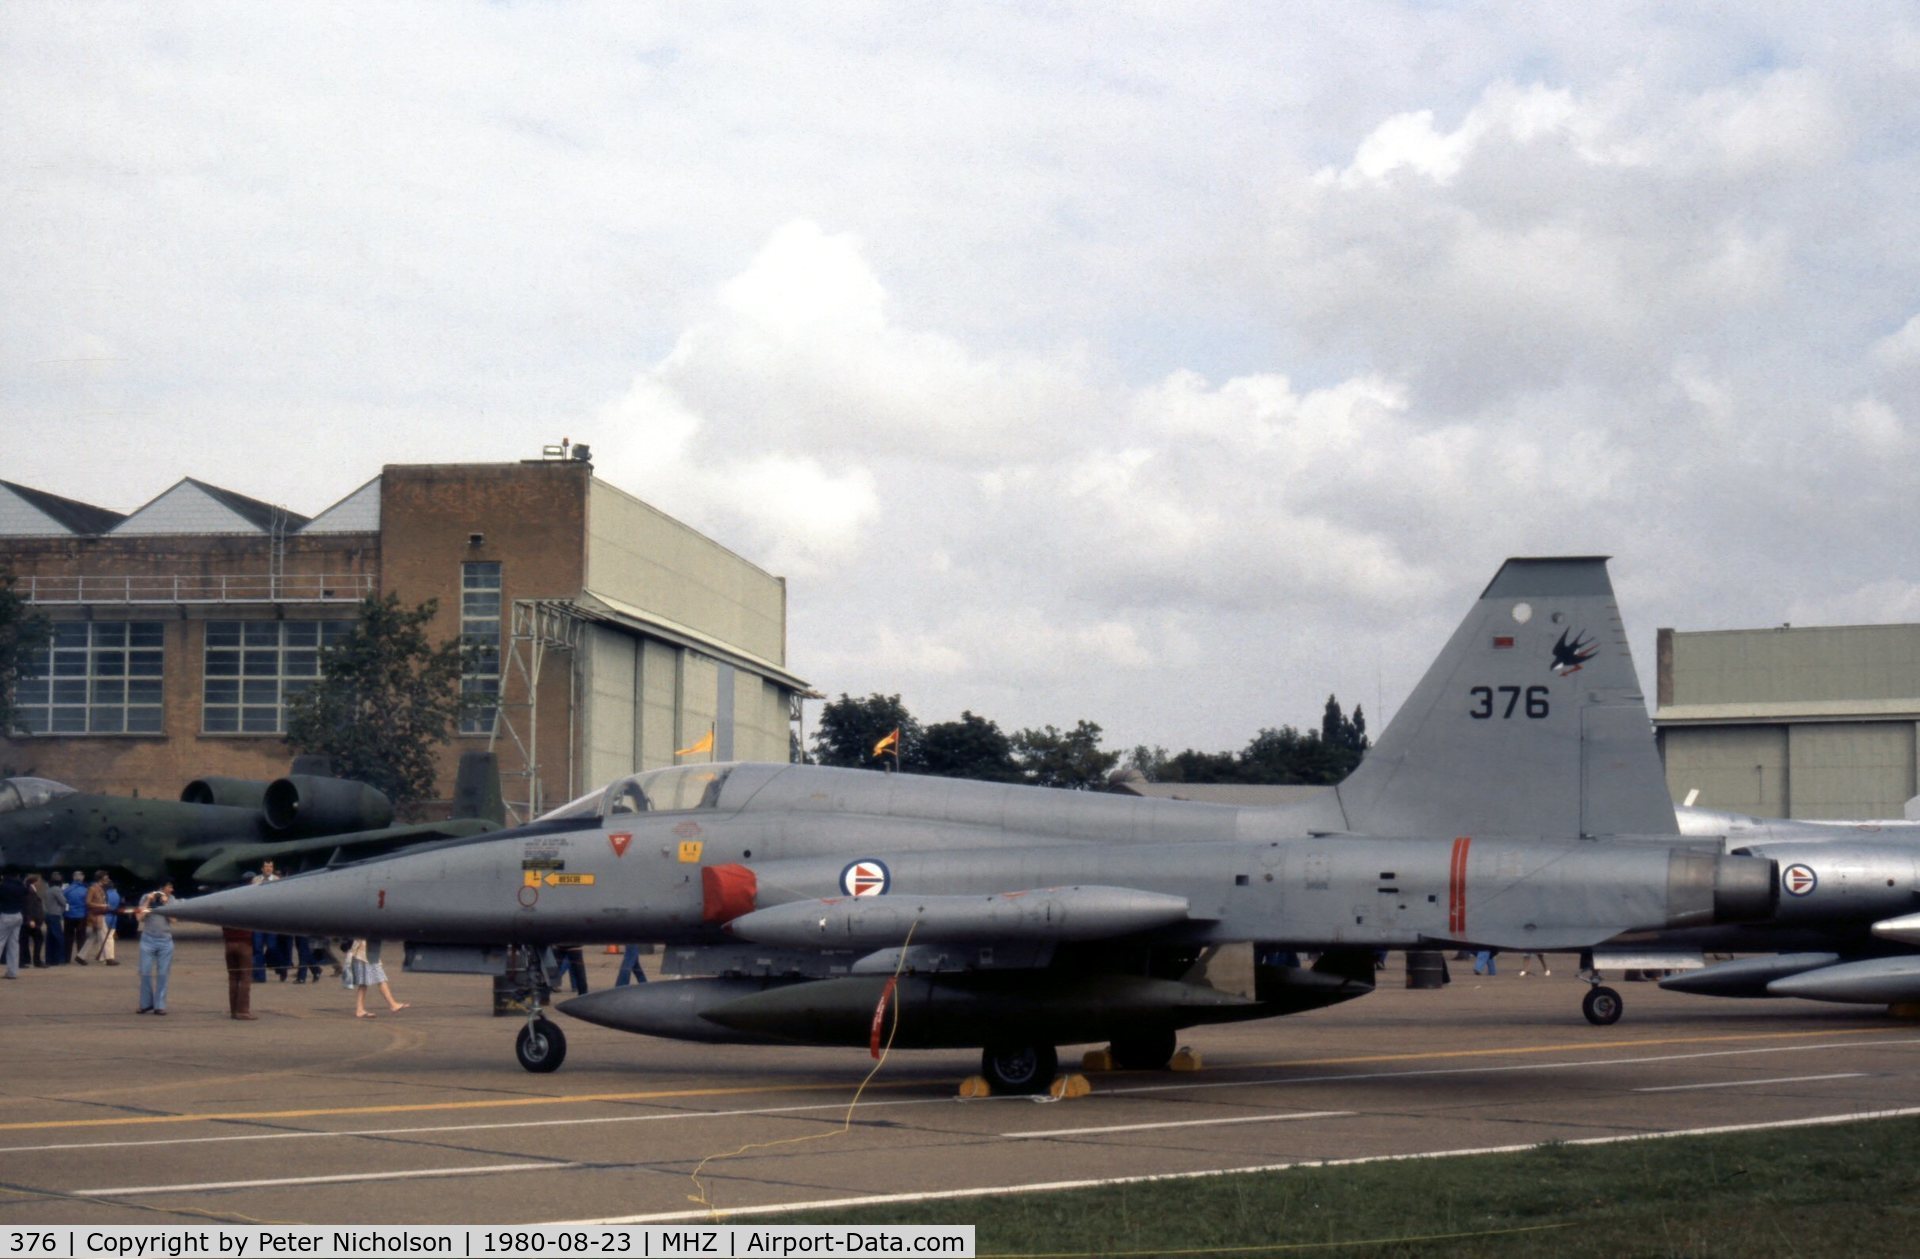 376, 1964 Northrop F-5A Freedom Fighter C/N N.7009, F-5A as 376 of 336 Skv Royal Norwegian Air Force on display at the 1980 Mildenhall Air Fete.